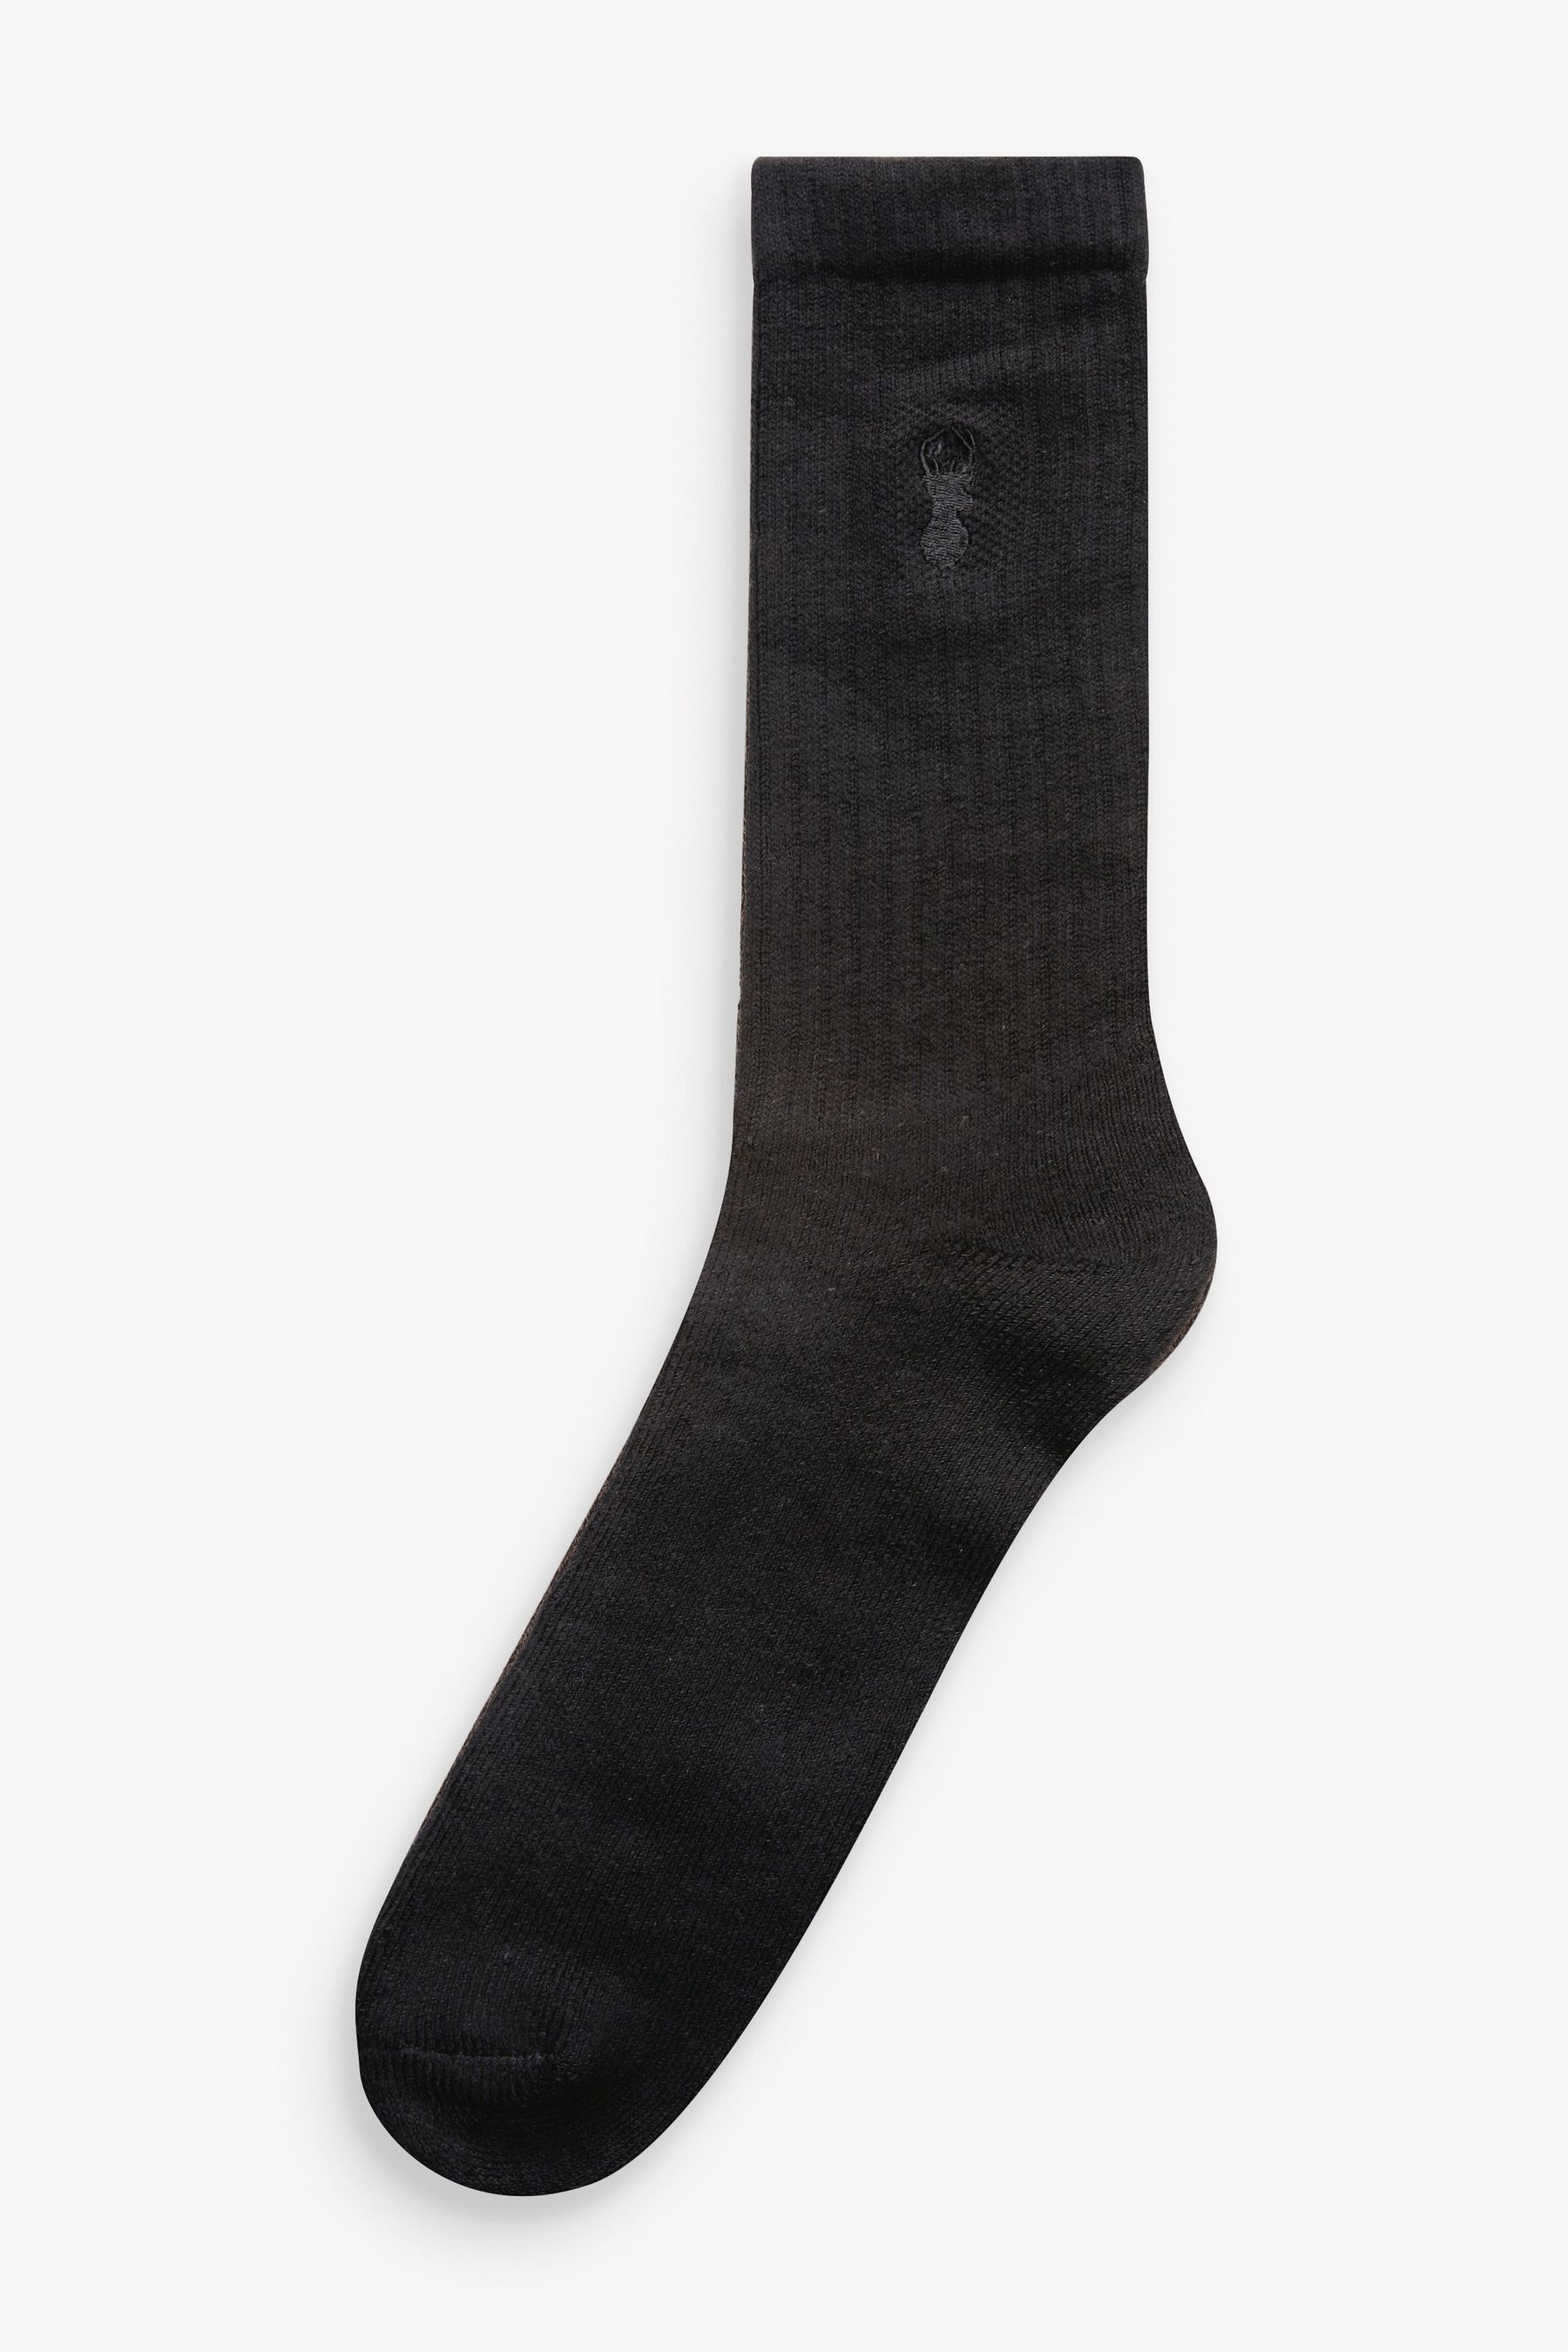 Buy Grey 4 Pack Heavyweight Socks from the Next UK online shop